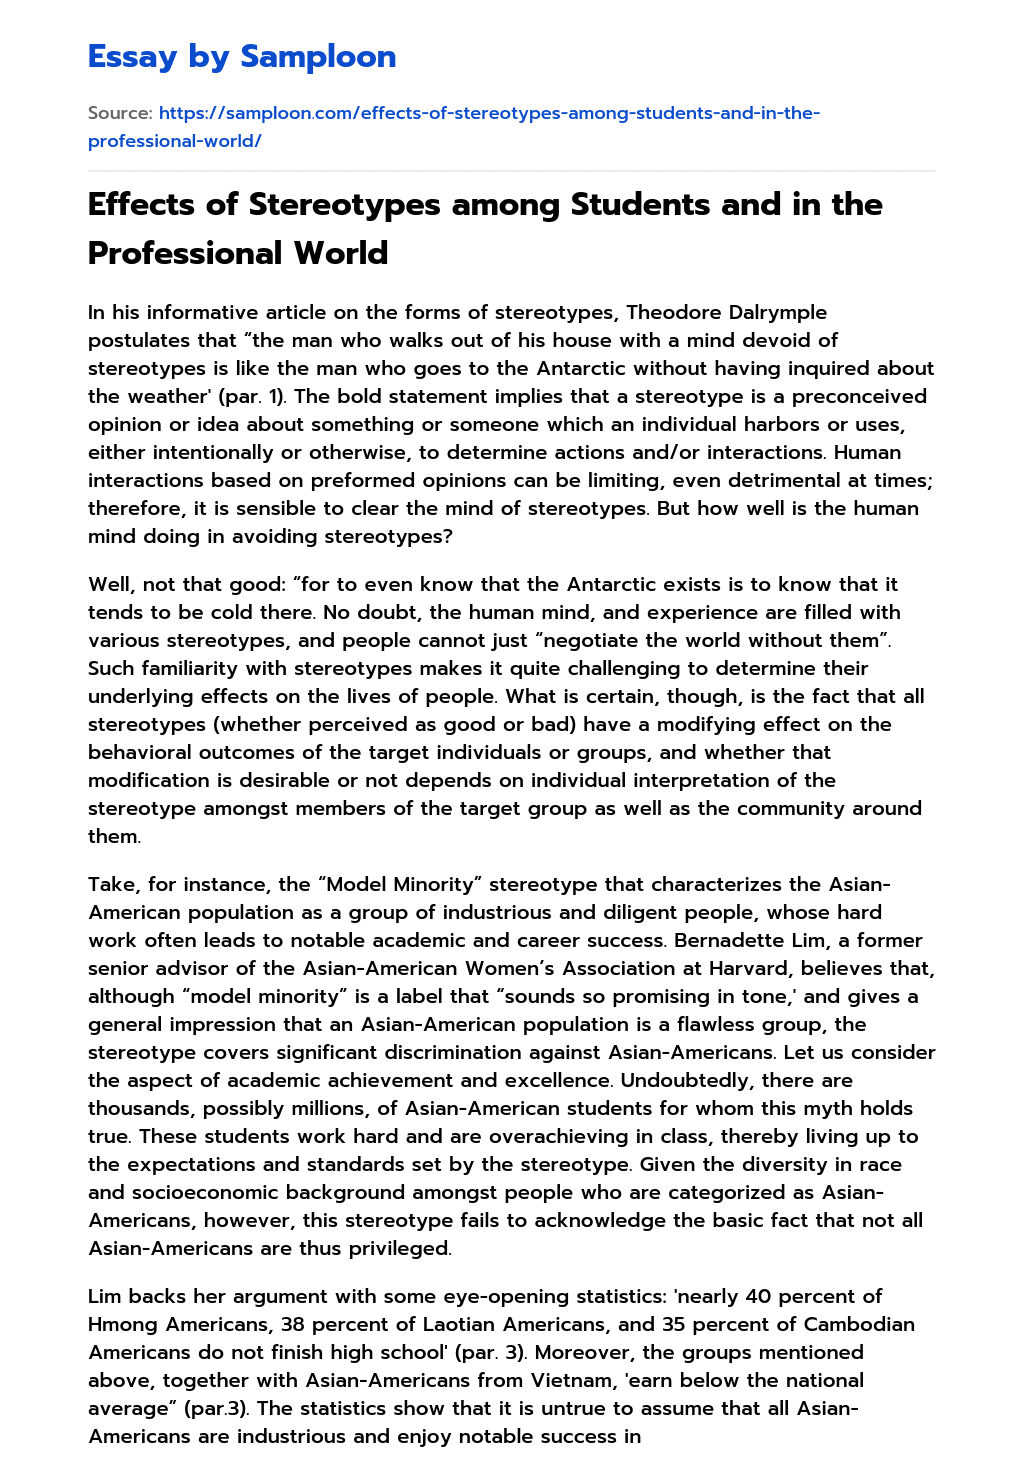 Effects of Stereotypes among Students and in the Professional World essay